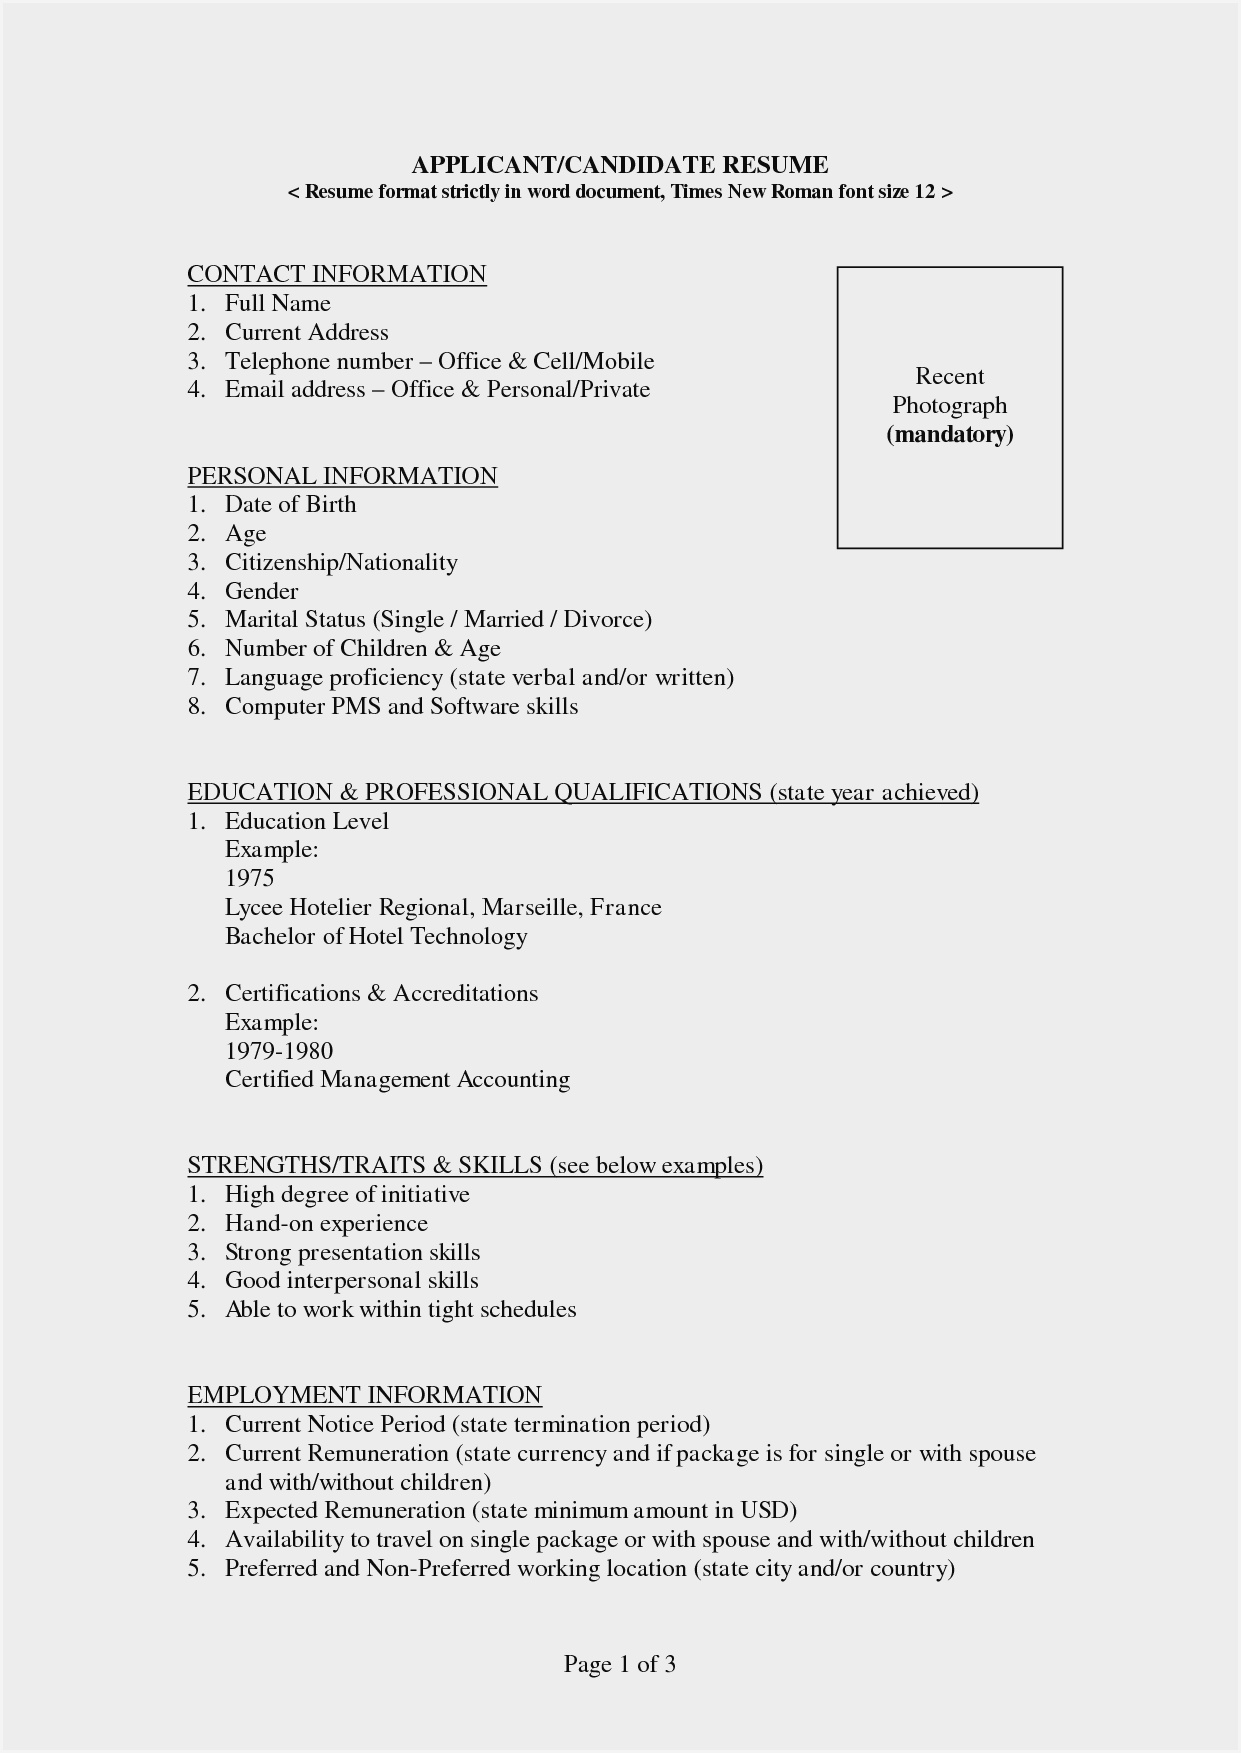 Resume Format Template For Word Download – Resume Sample With How To Get A Resume Template On Word